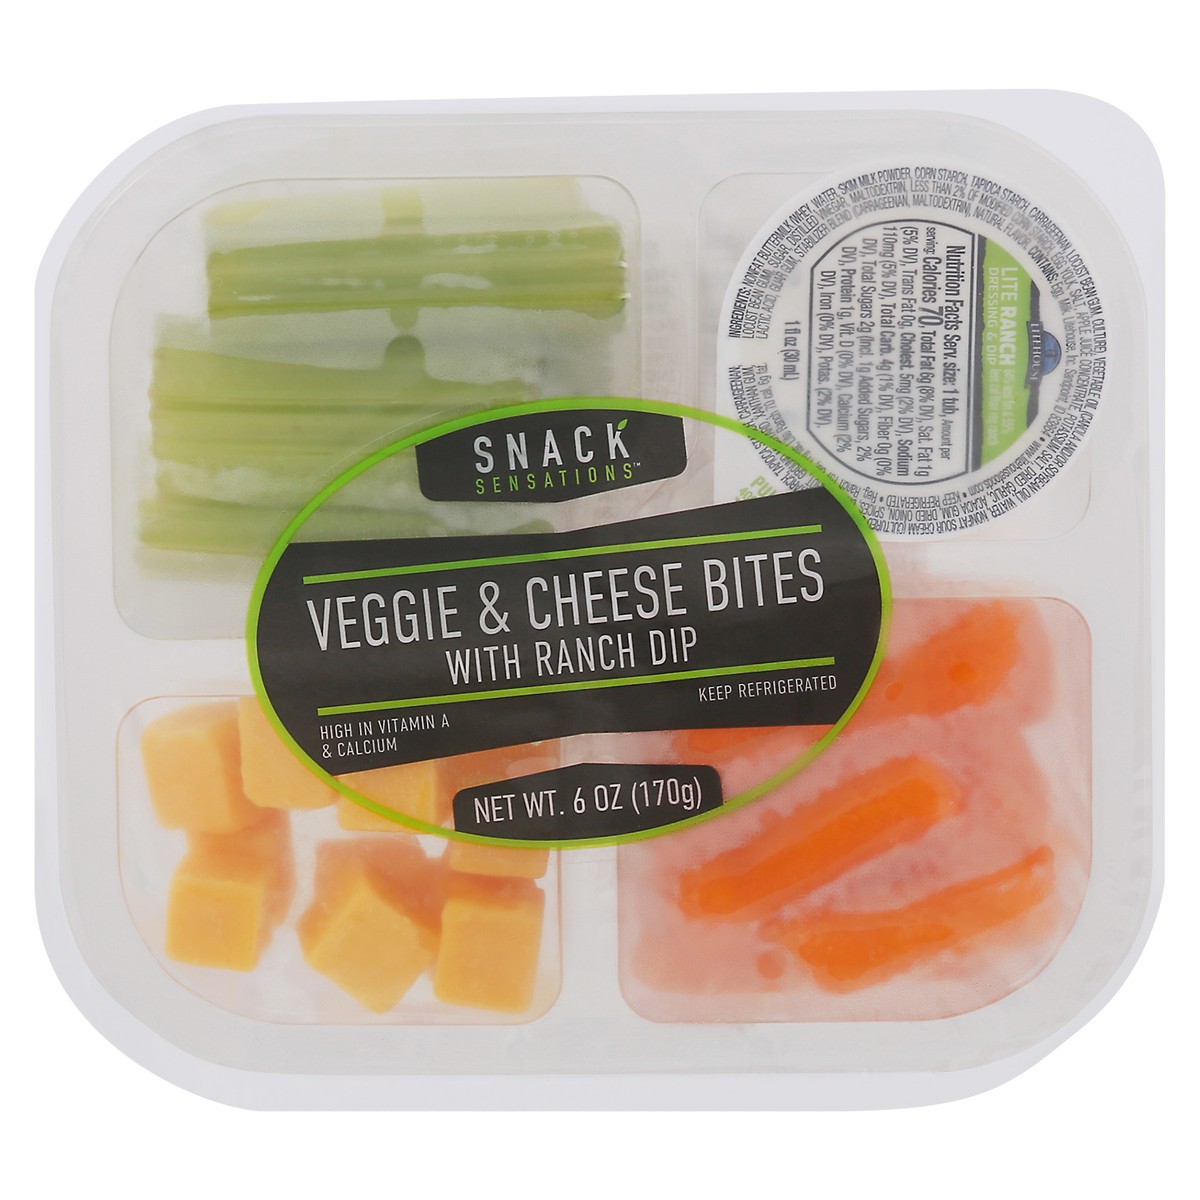 slide 11 of 11, Snack Sensations with Ranch Dip Veggie & Cheese Bites with Ranch Dip 6 oz, 6 oz